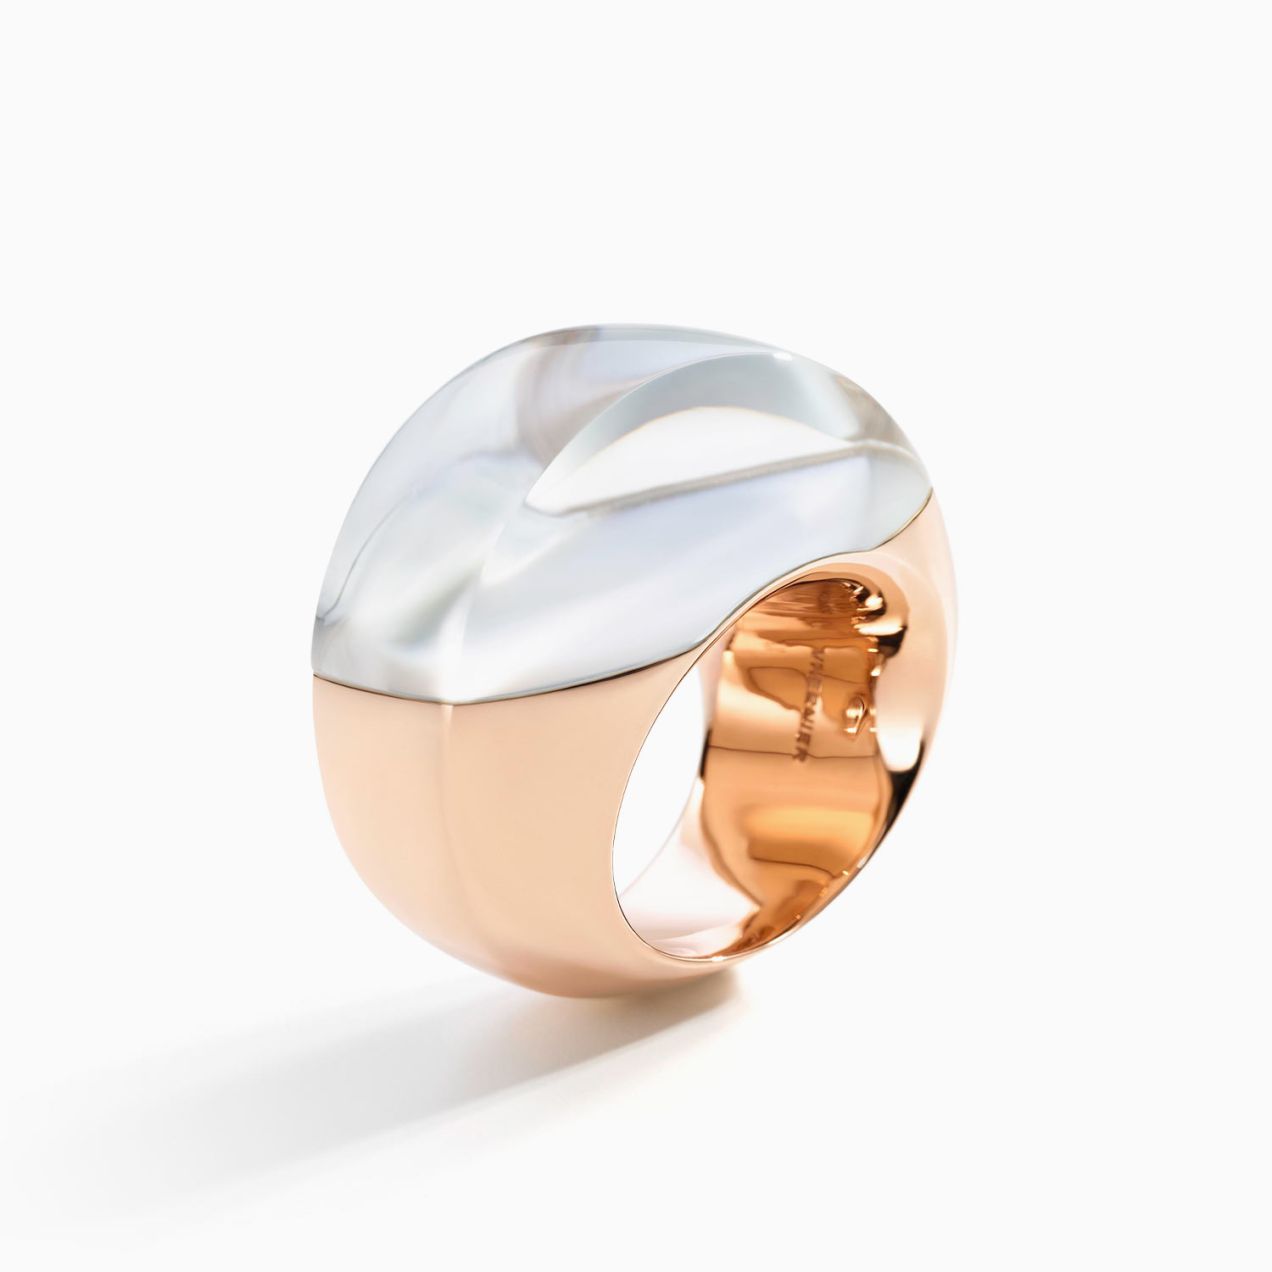 Vhernier Aladdin ring in rose gold with quartz crystal and mother of pearl